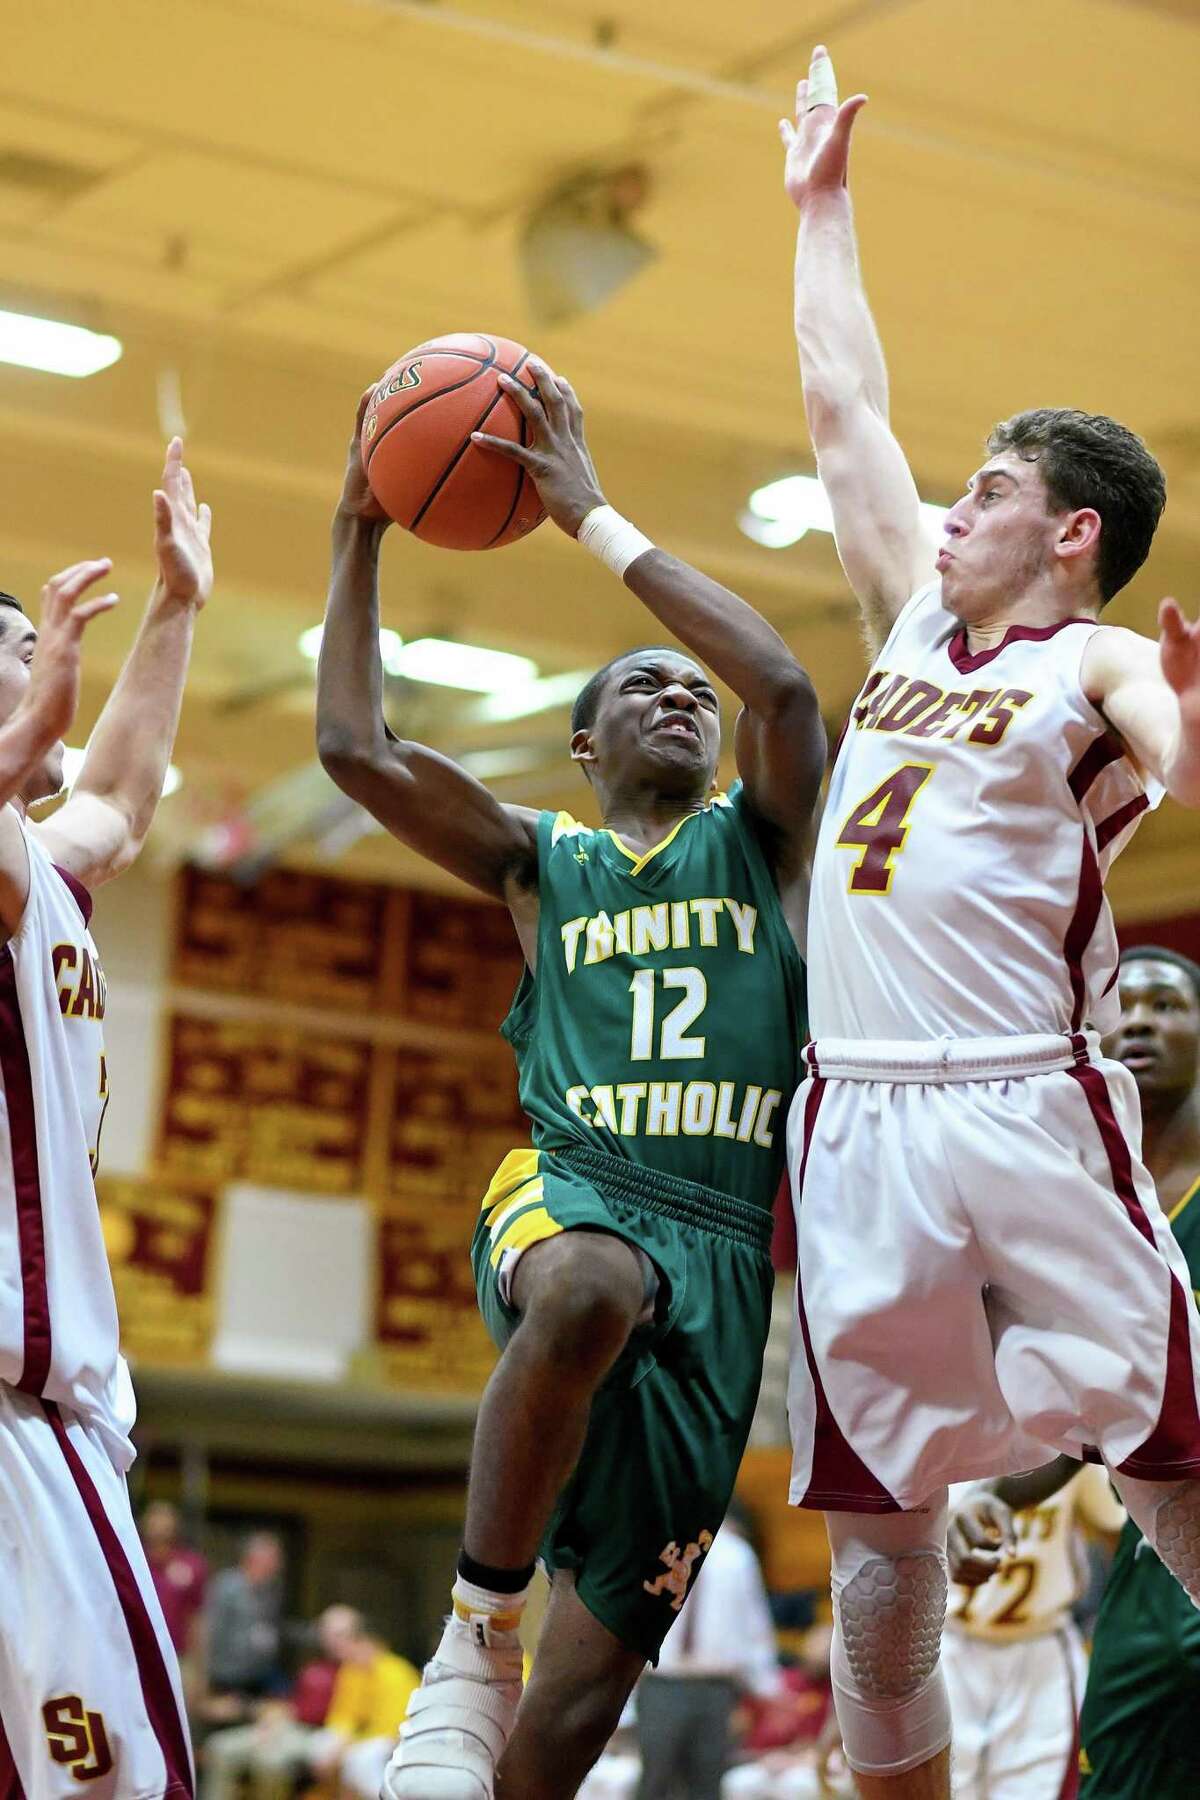 Trinity Catholic’s Akim Joseph brings the ball to the basket against St. Joseph on Friday in Trumbull.